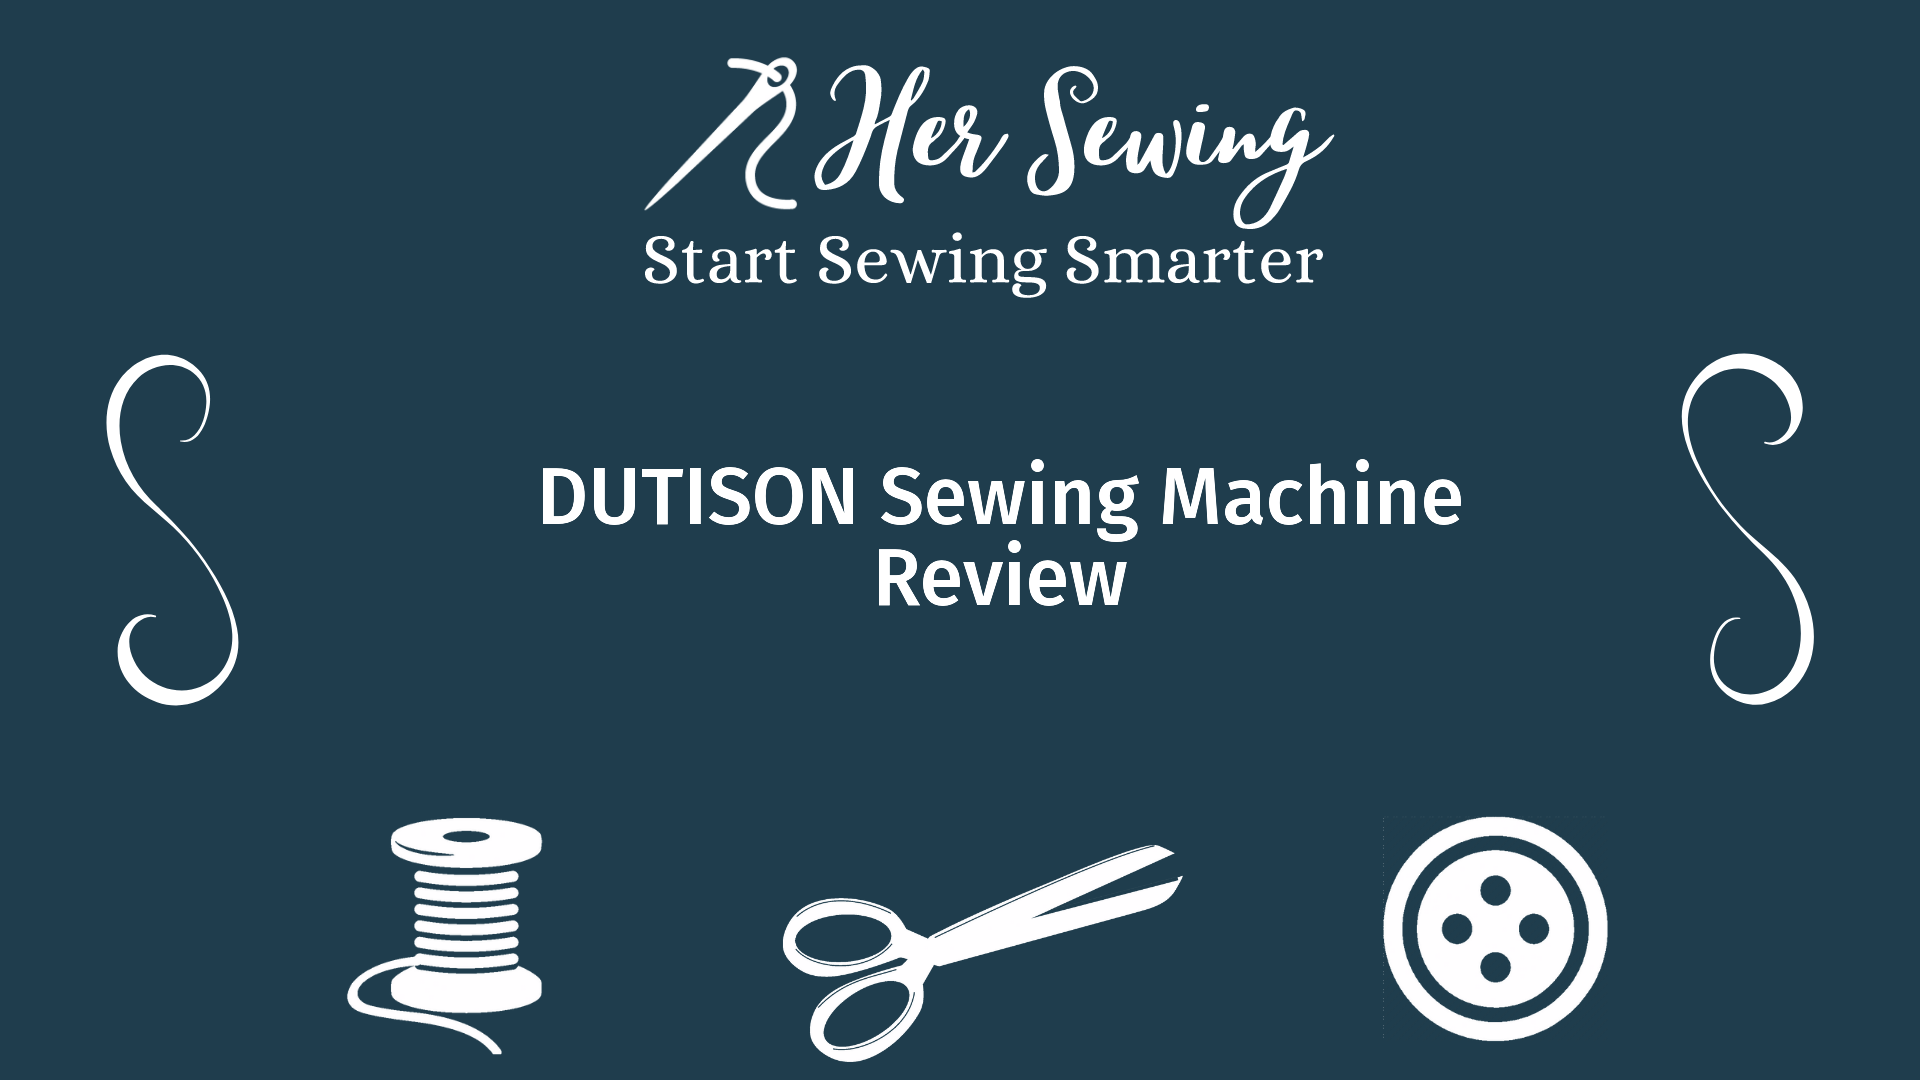 DUTISON Sewing Machine Review